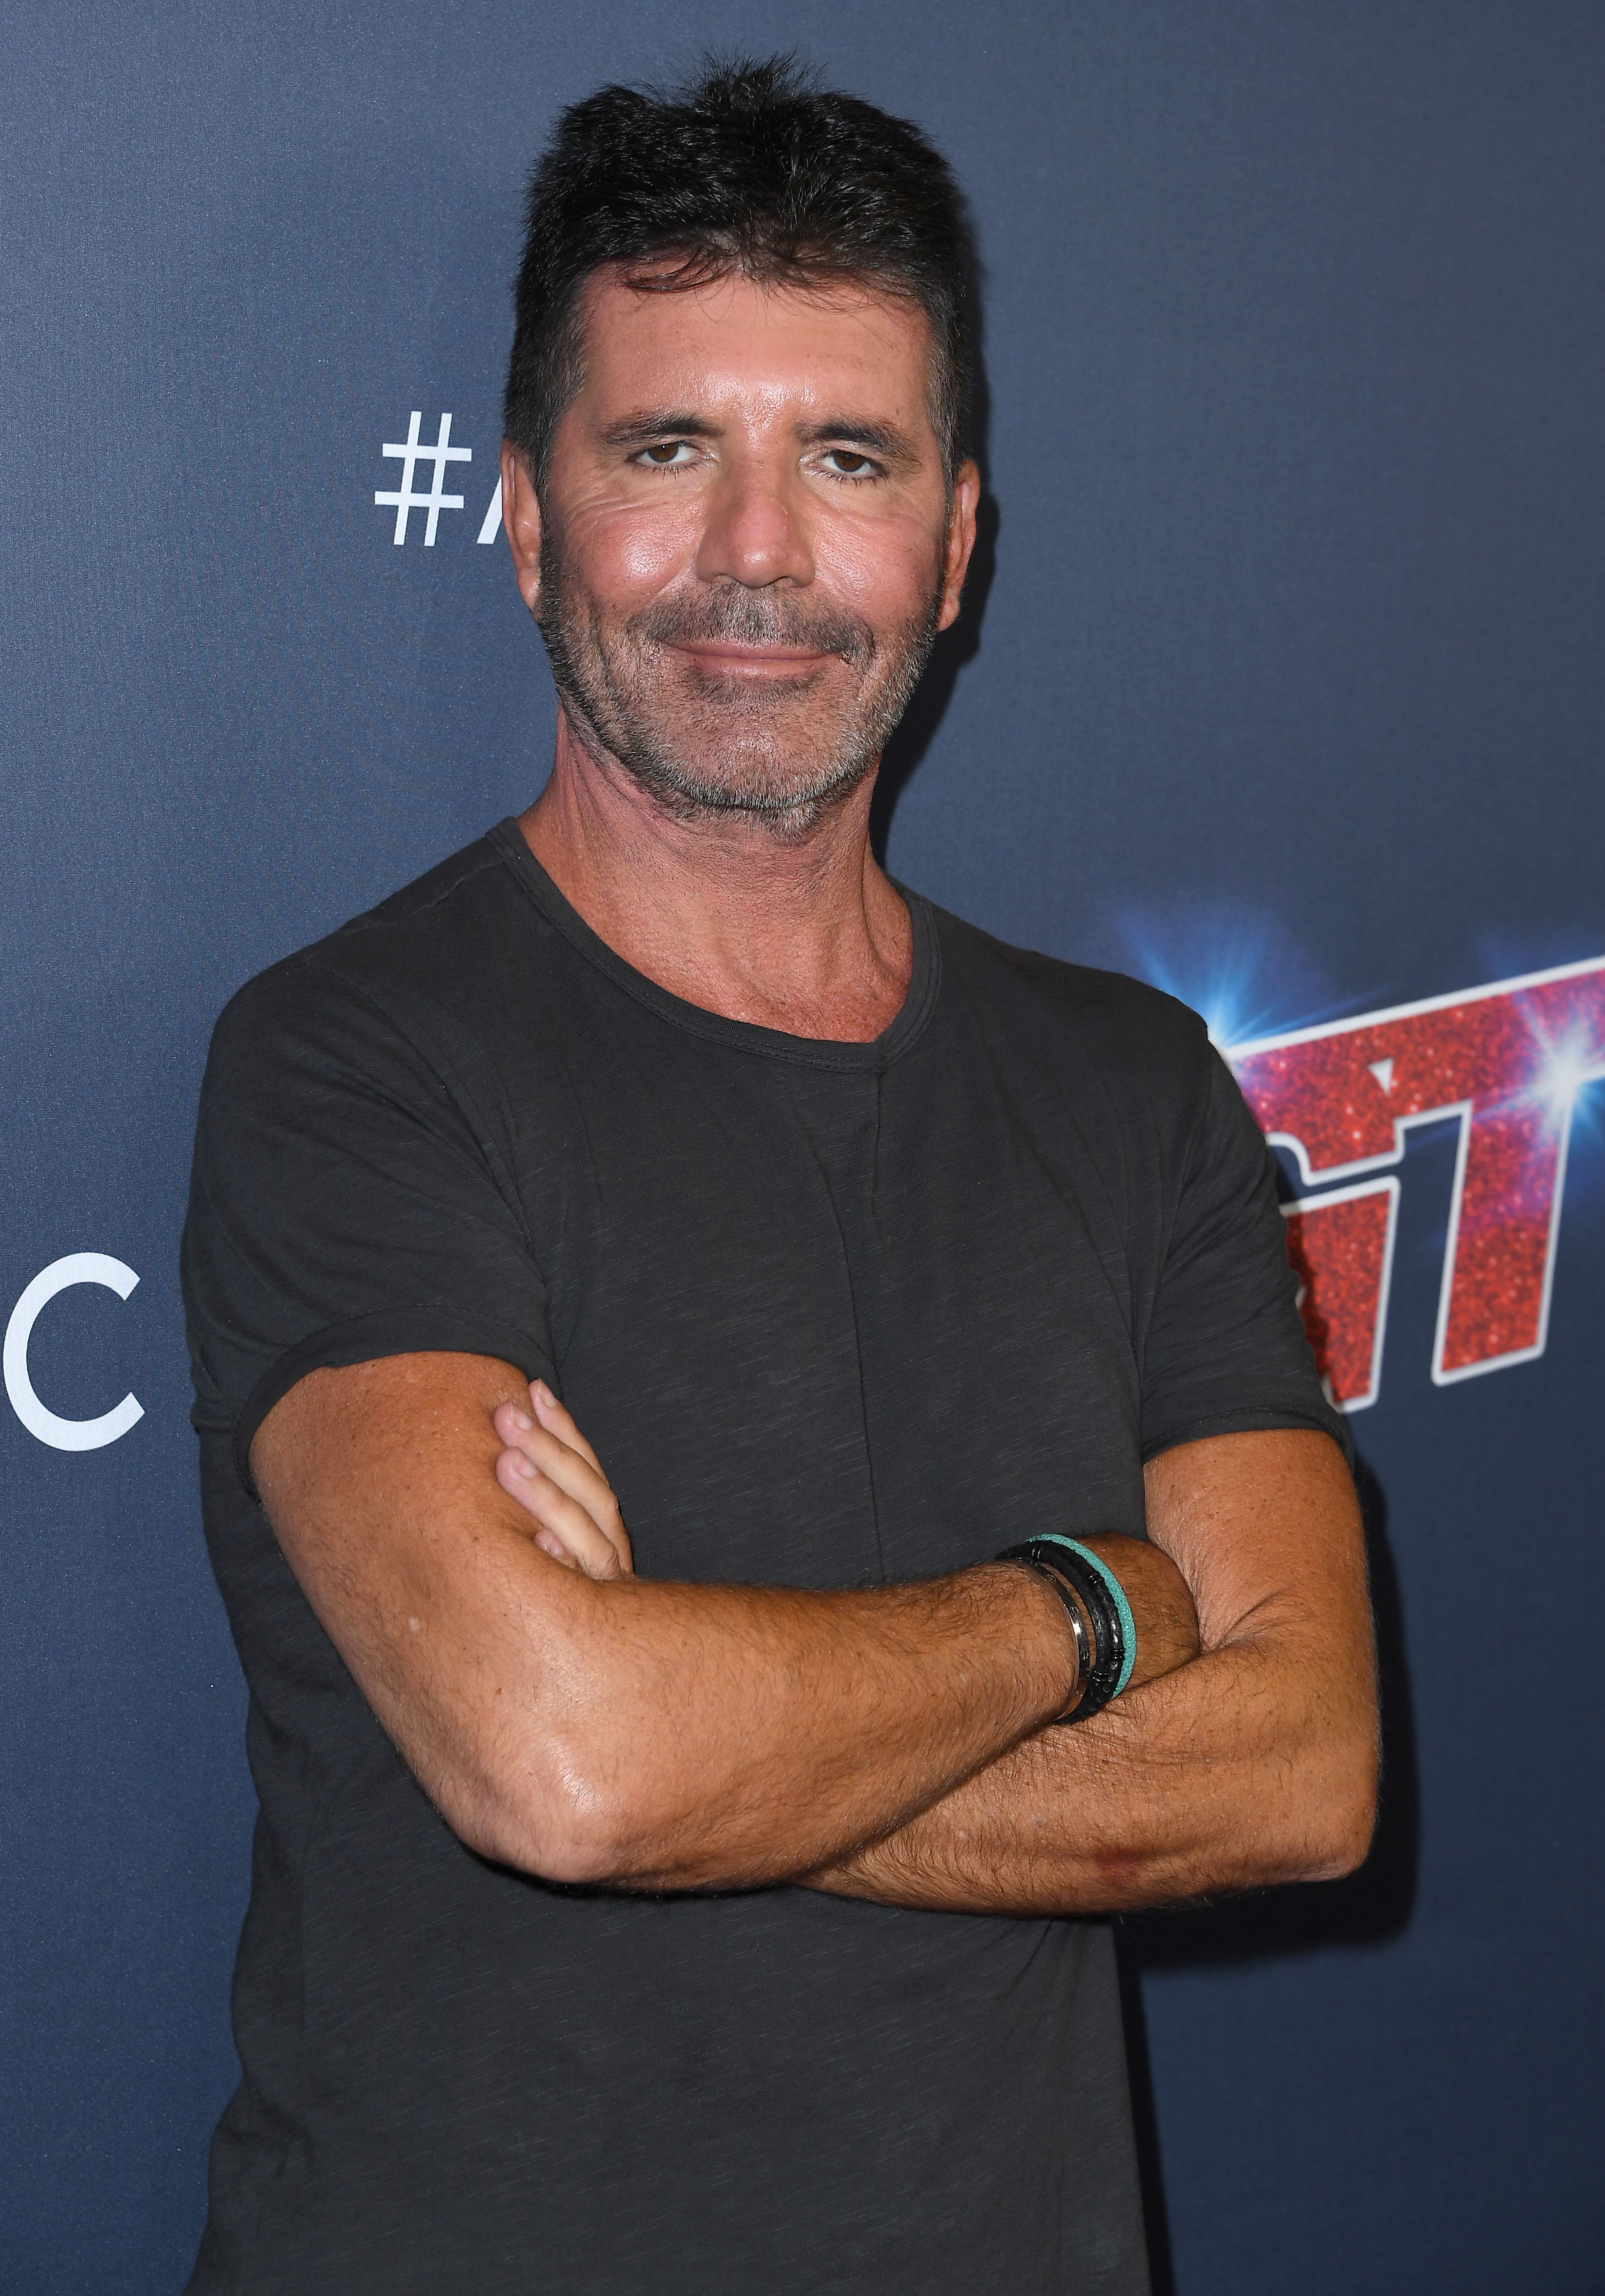 Simon cowell chokes up talking to 'agt' singer whose cancer took ...